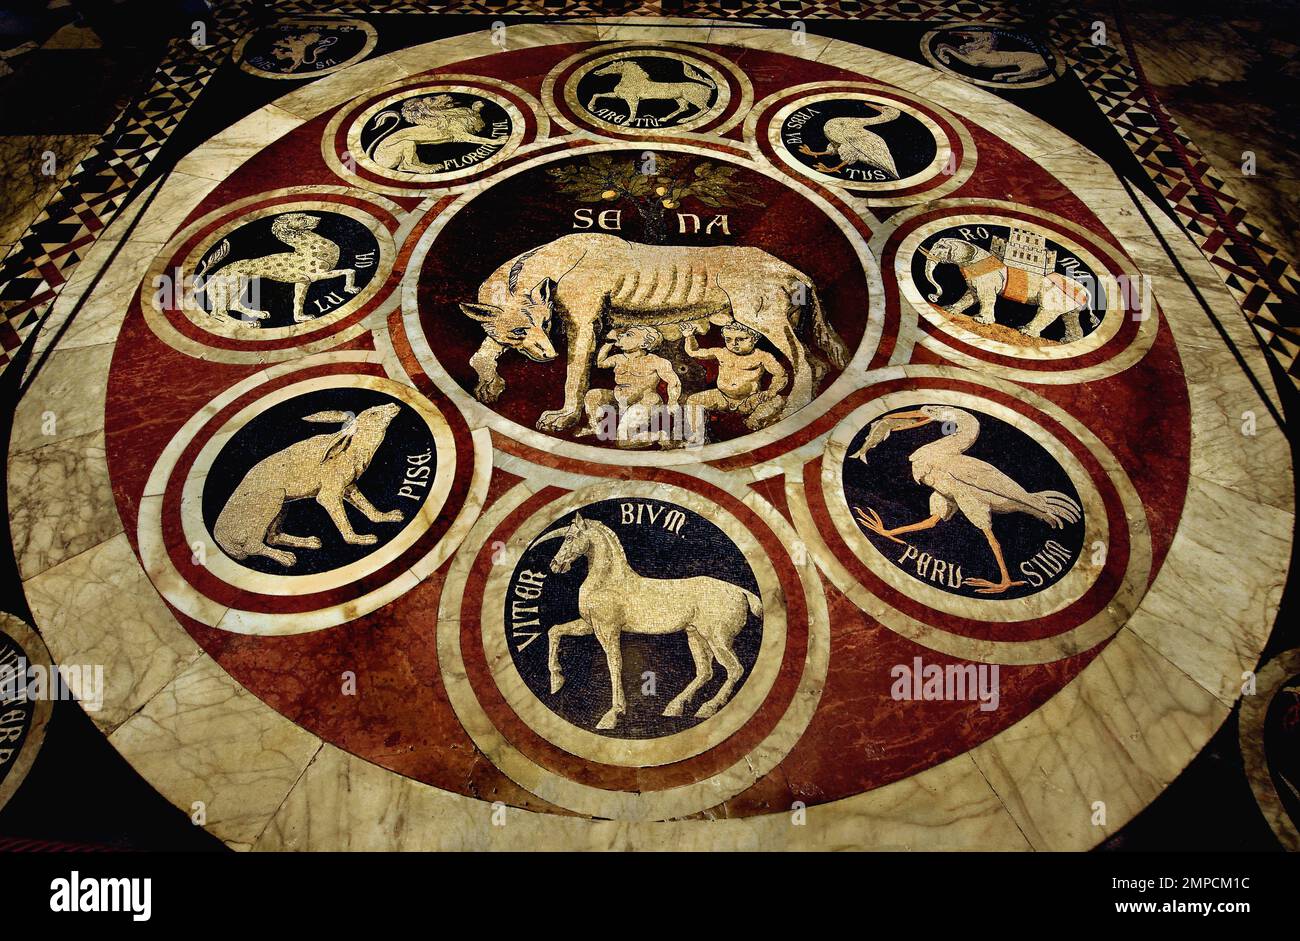 The legend of Aschius and Senius - The Sienese She Wolf with emblems of 12 confederate cities   Metropolitan Cathedral of Saint Mary of the Assumption - Duomo di Siena,  1215 and 1348, 13th Century, Tuscany, Italy, Italian, Gothic, Romanesque, Classical. ( One of the earliest panels in the inlaid mosaic floor of the Cathedral, the She-Wolf of Siena ) Stock Photo